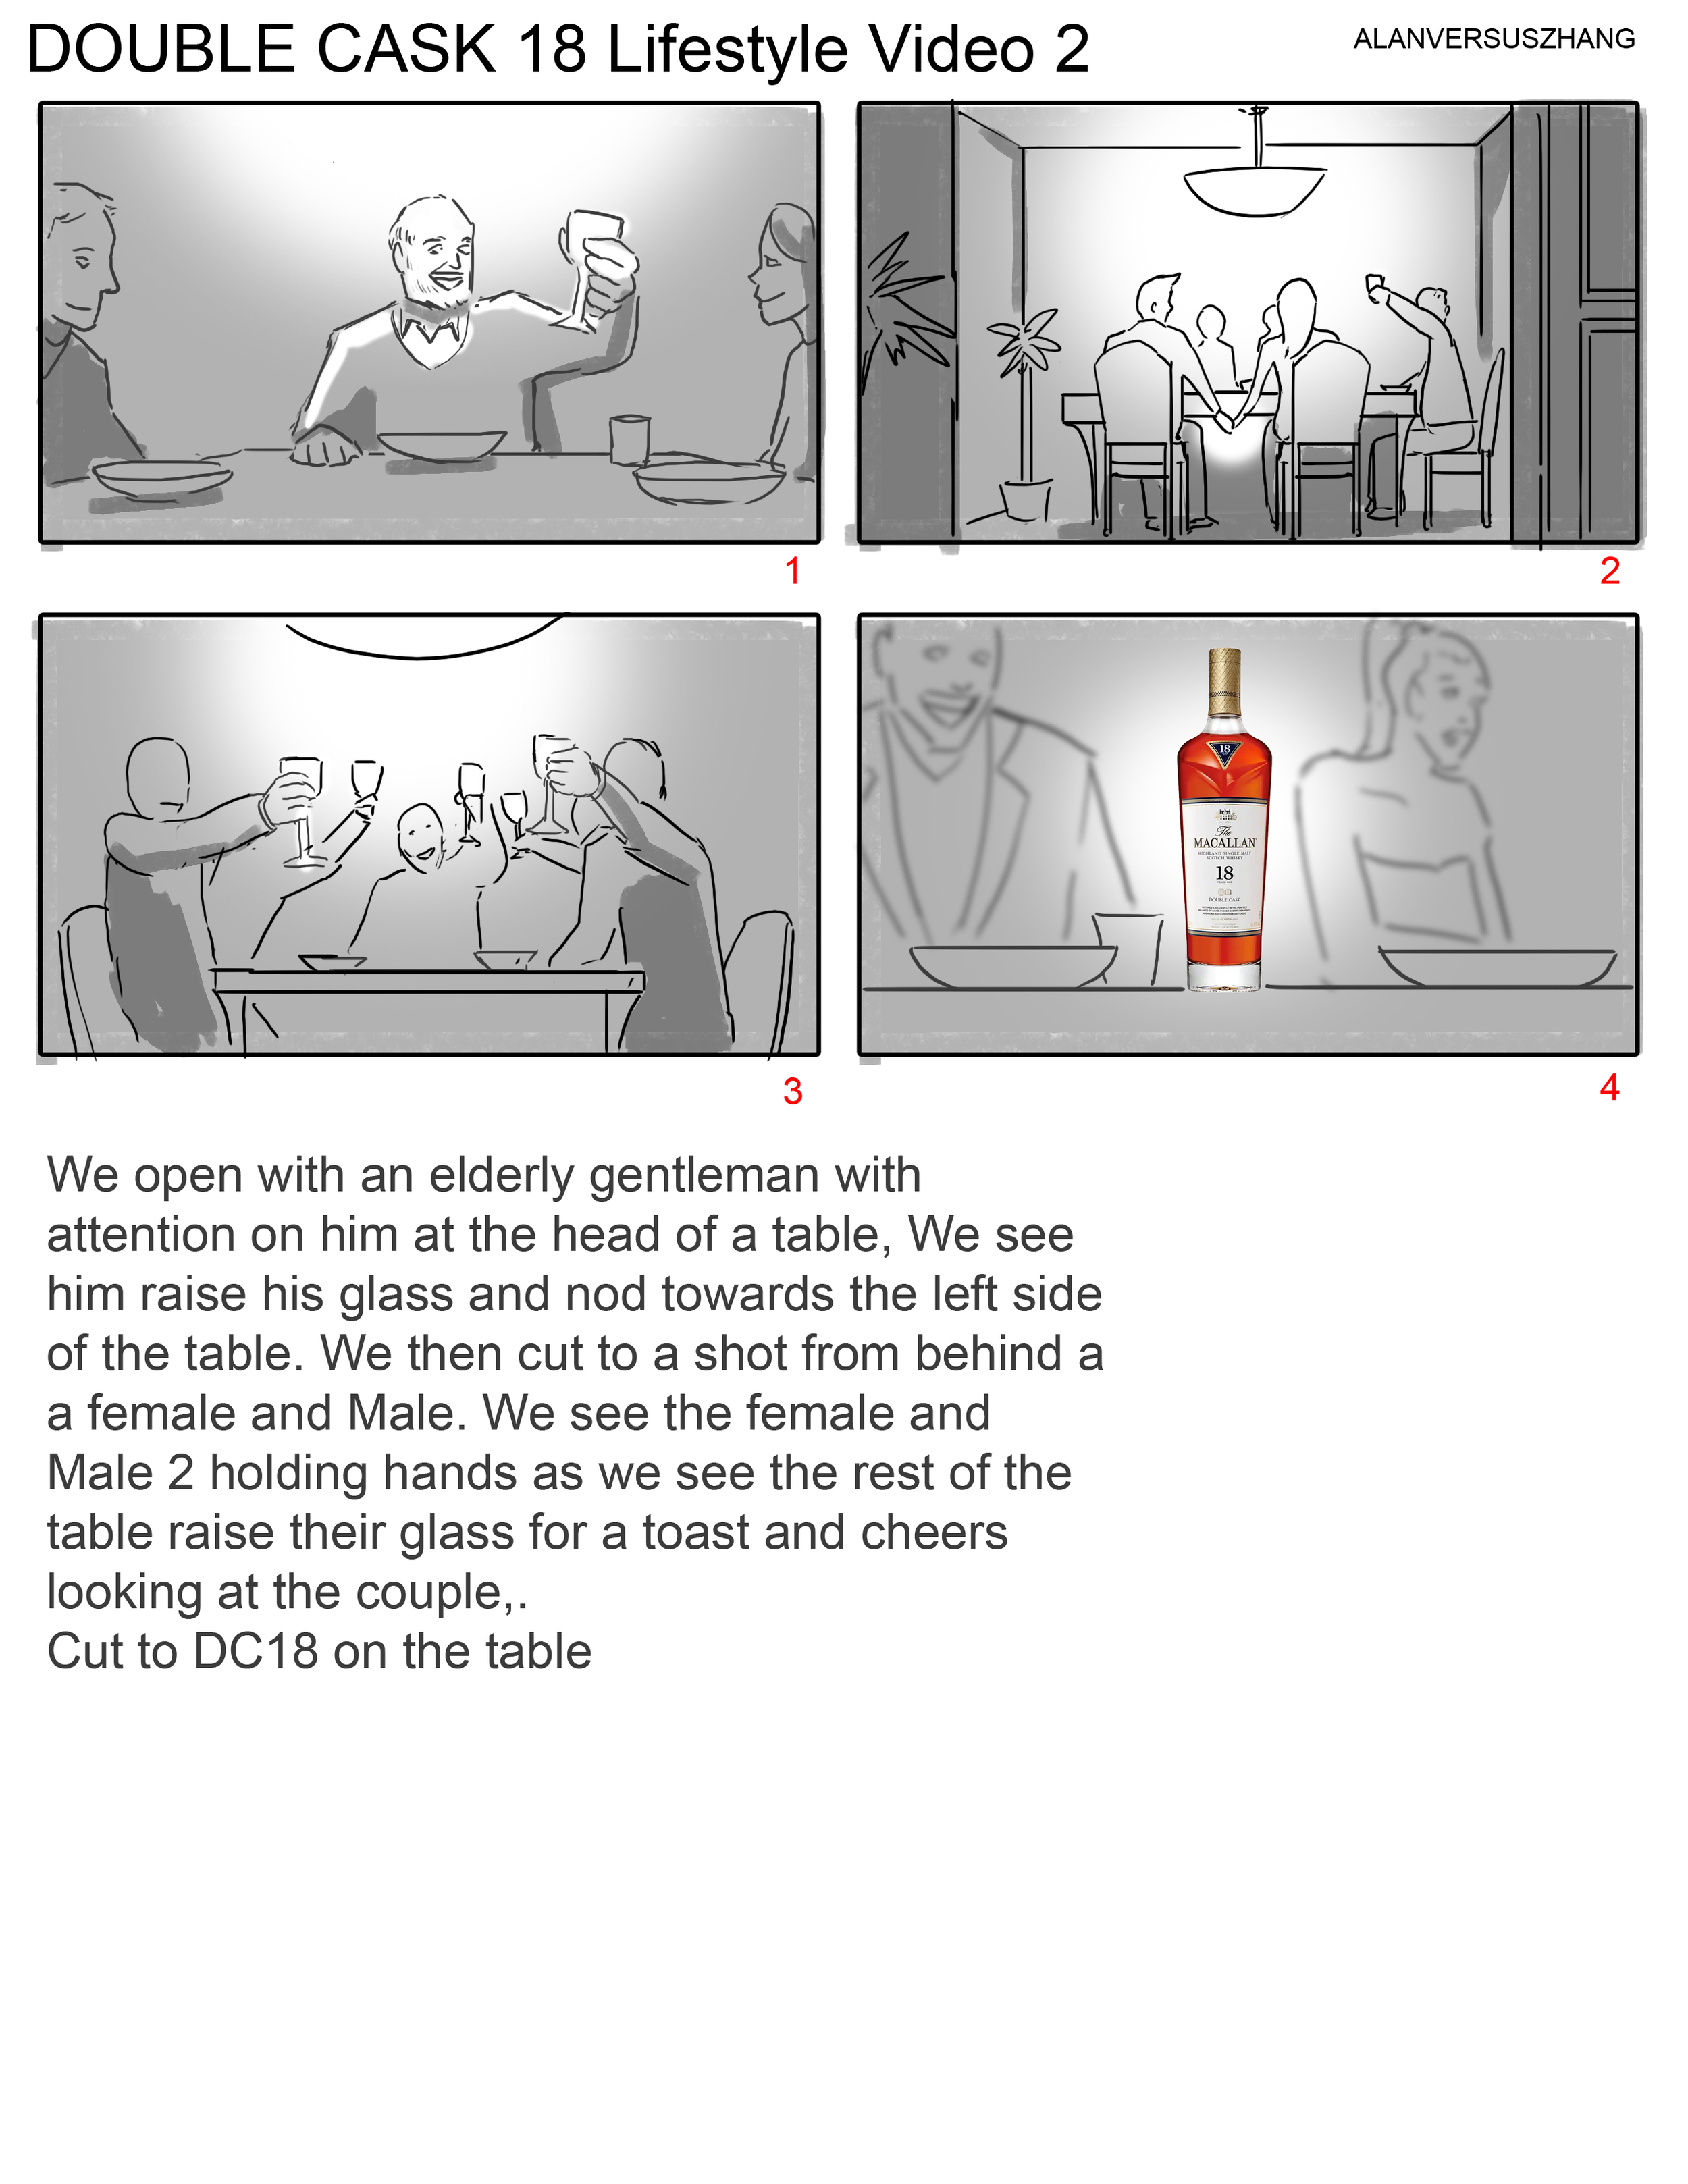 11.10.23_Macallan_Storyboards_Page_12_Image_0001.png